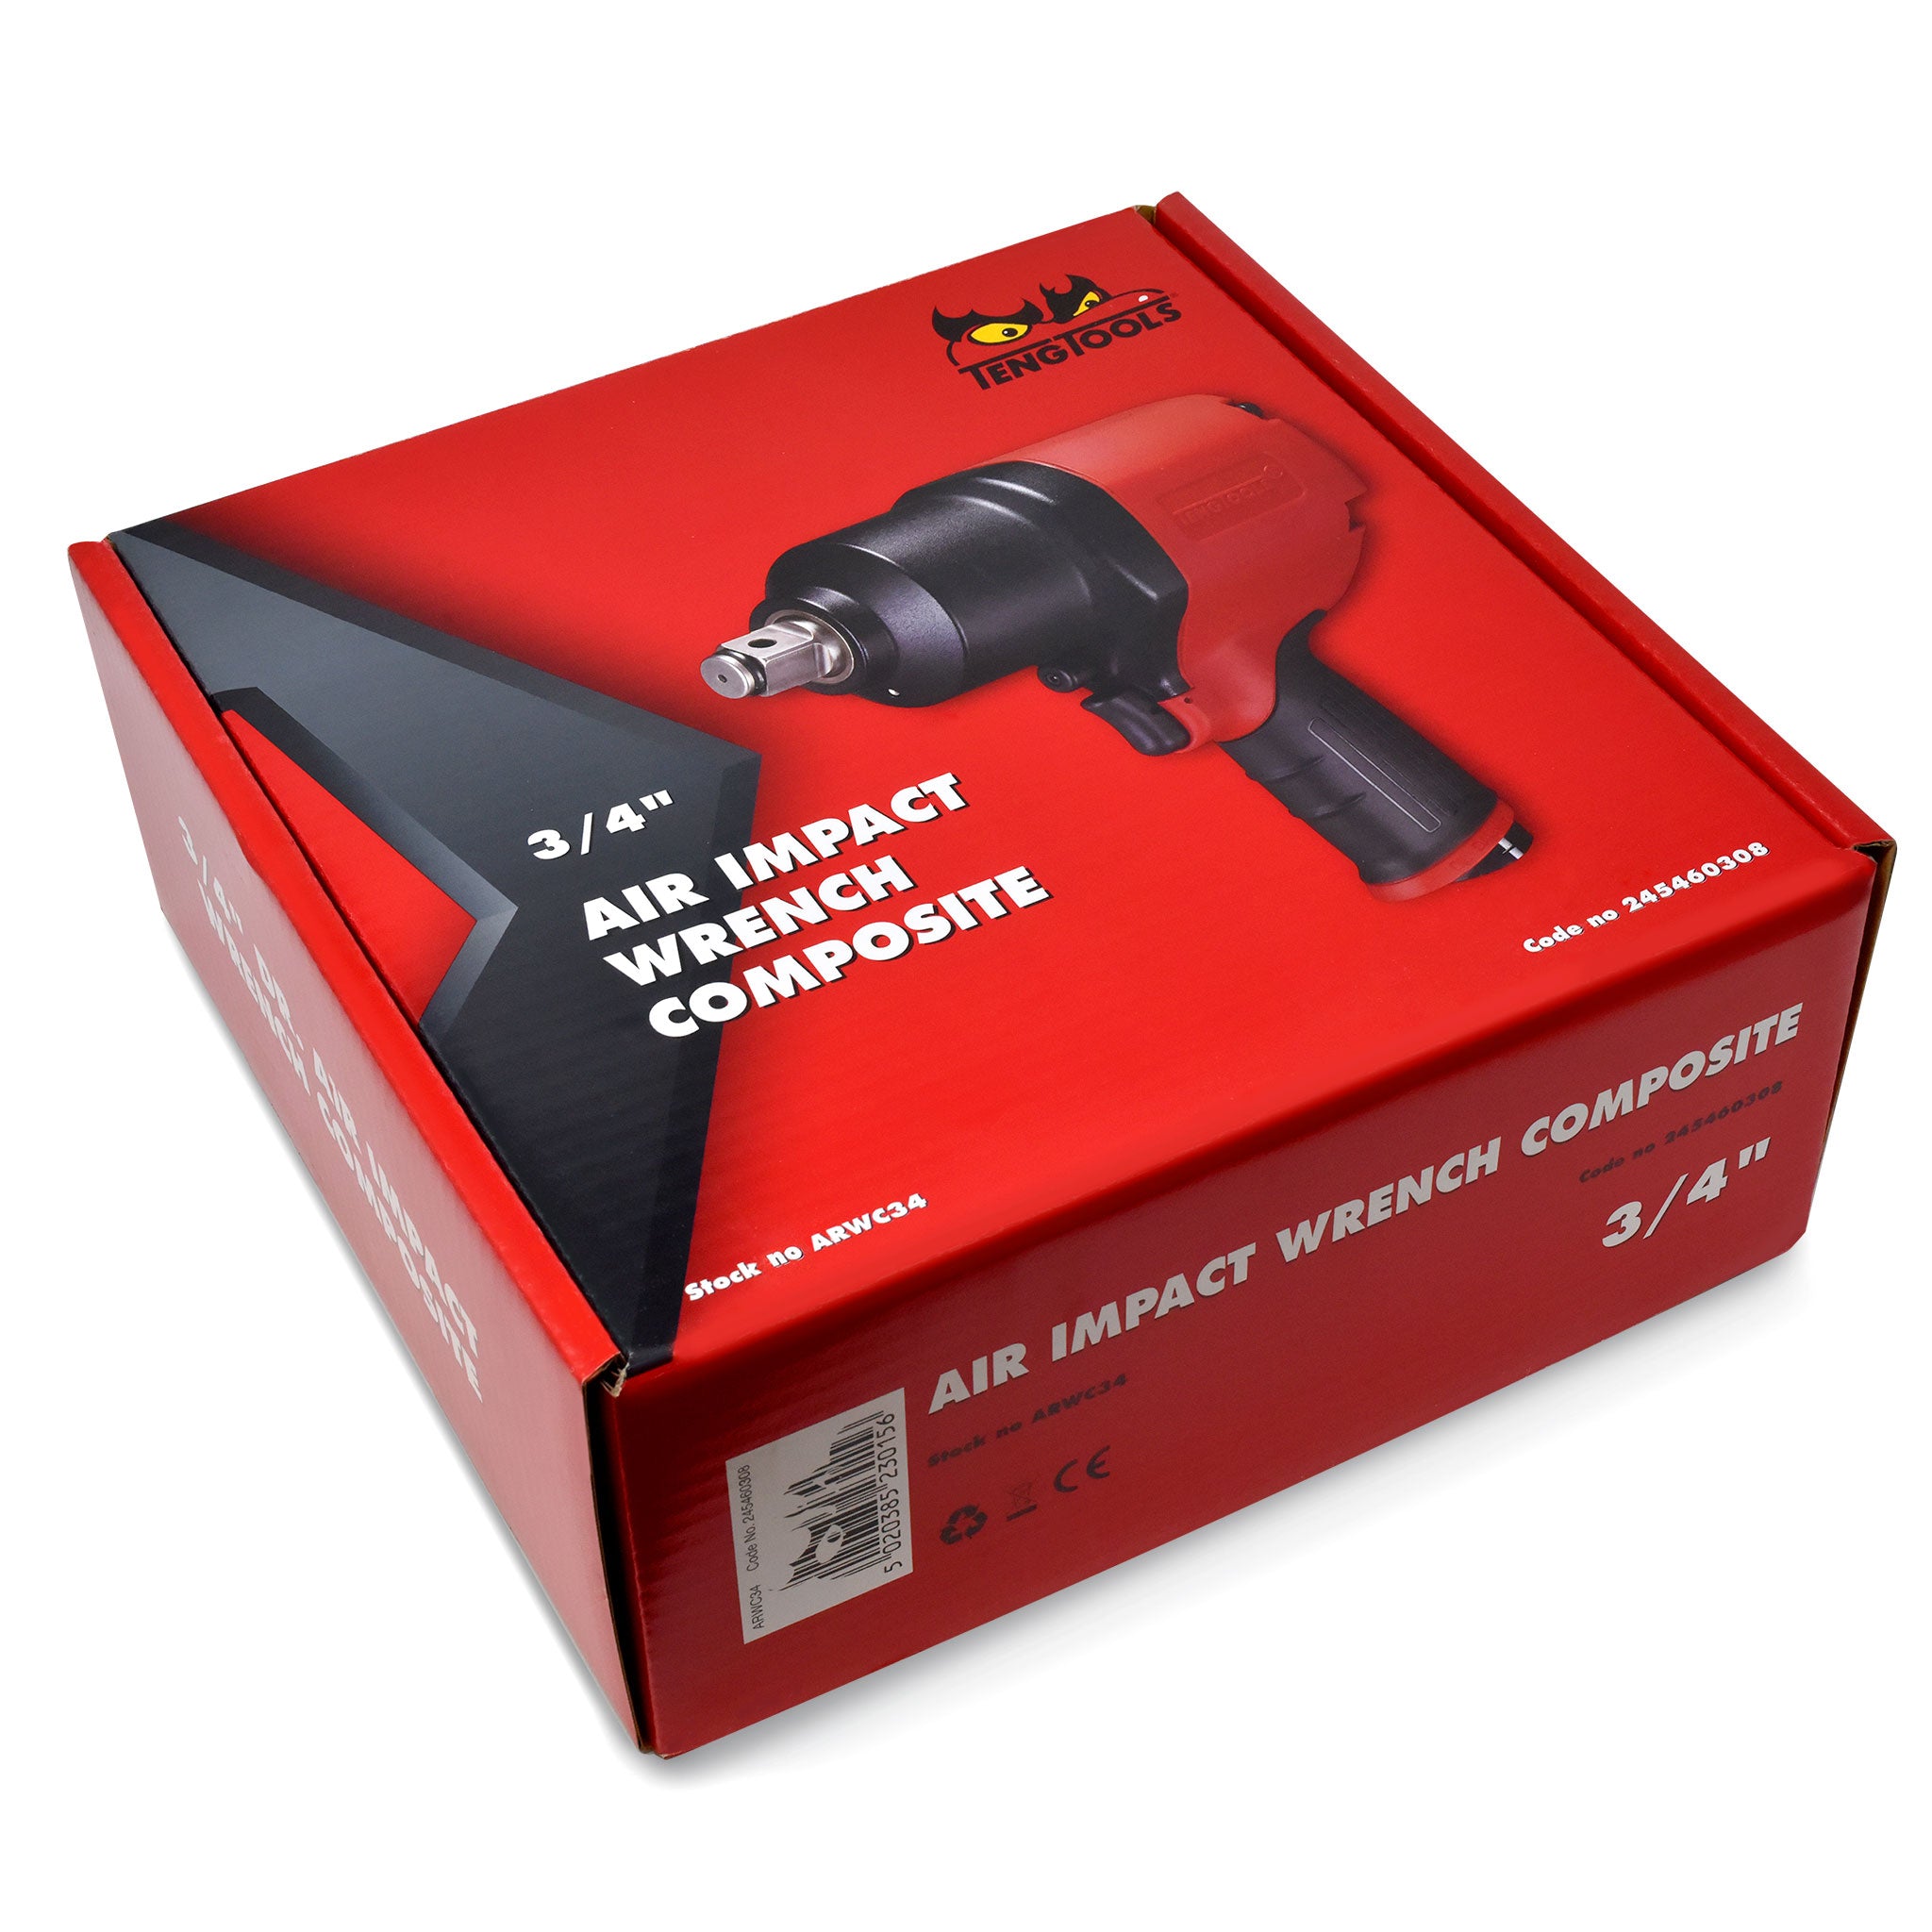 Teng Tools 3/4 Inch Square Drive Reversible High Torque Composite Air Impact Wrench Gun - ARWC34